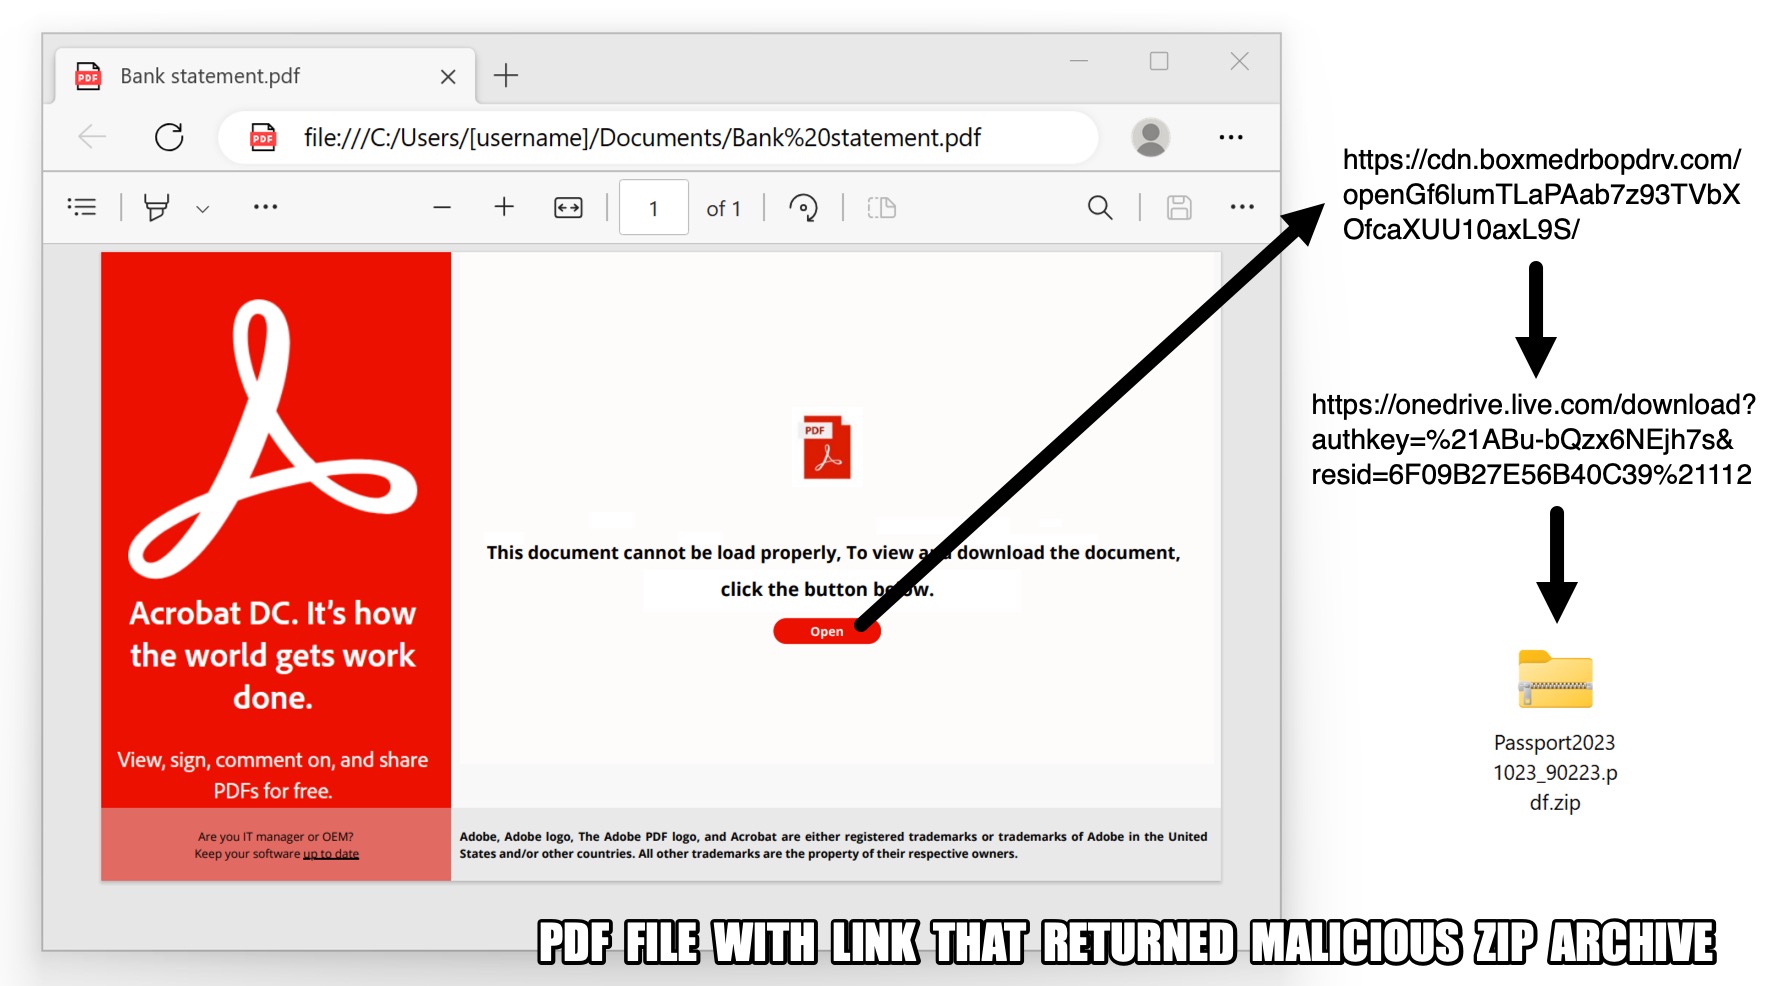 Screenshot of Adobe Acrobat. Red open button goes to URL indicated by arrow. Next, file downloads from OneDrive. Arrow points to zip file Passport2021023_90223.pdf.zip. 